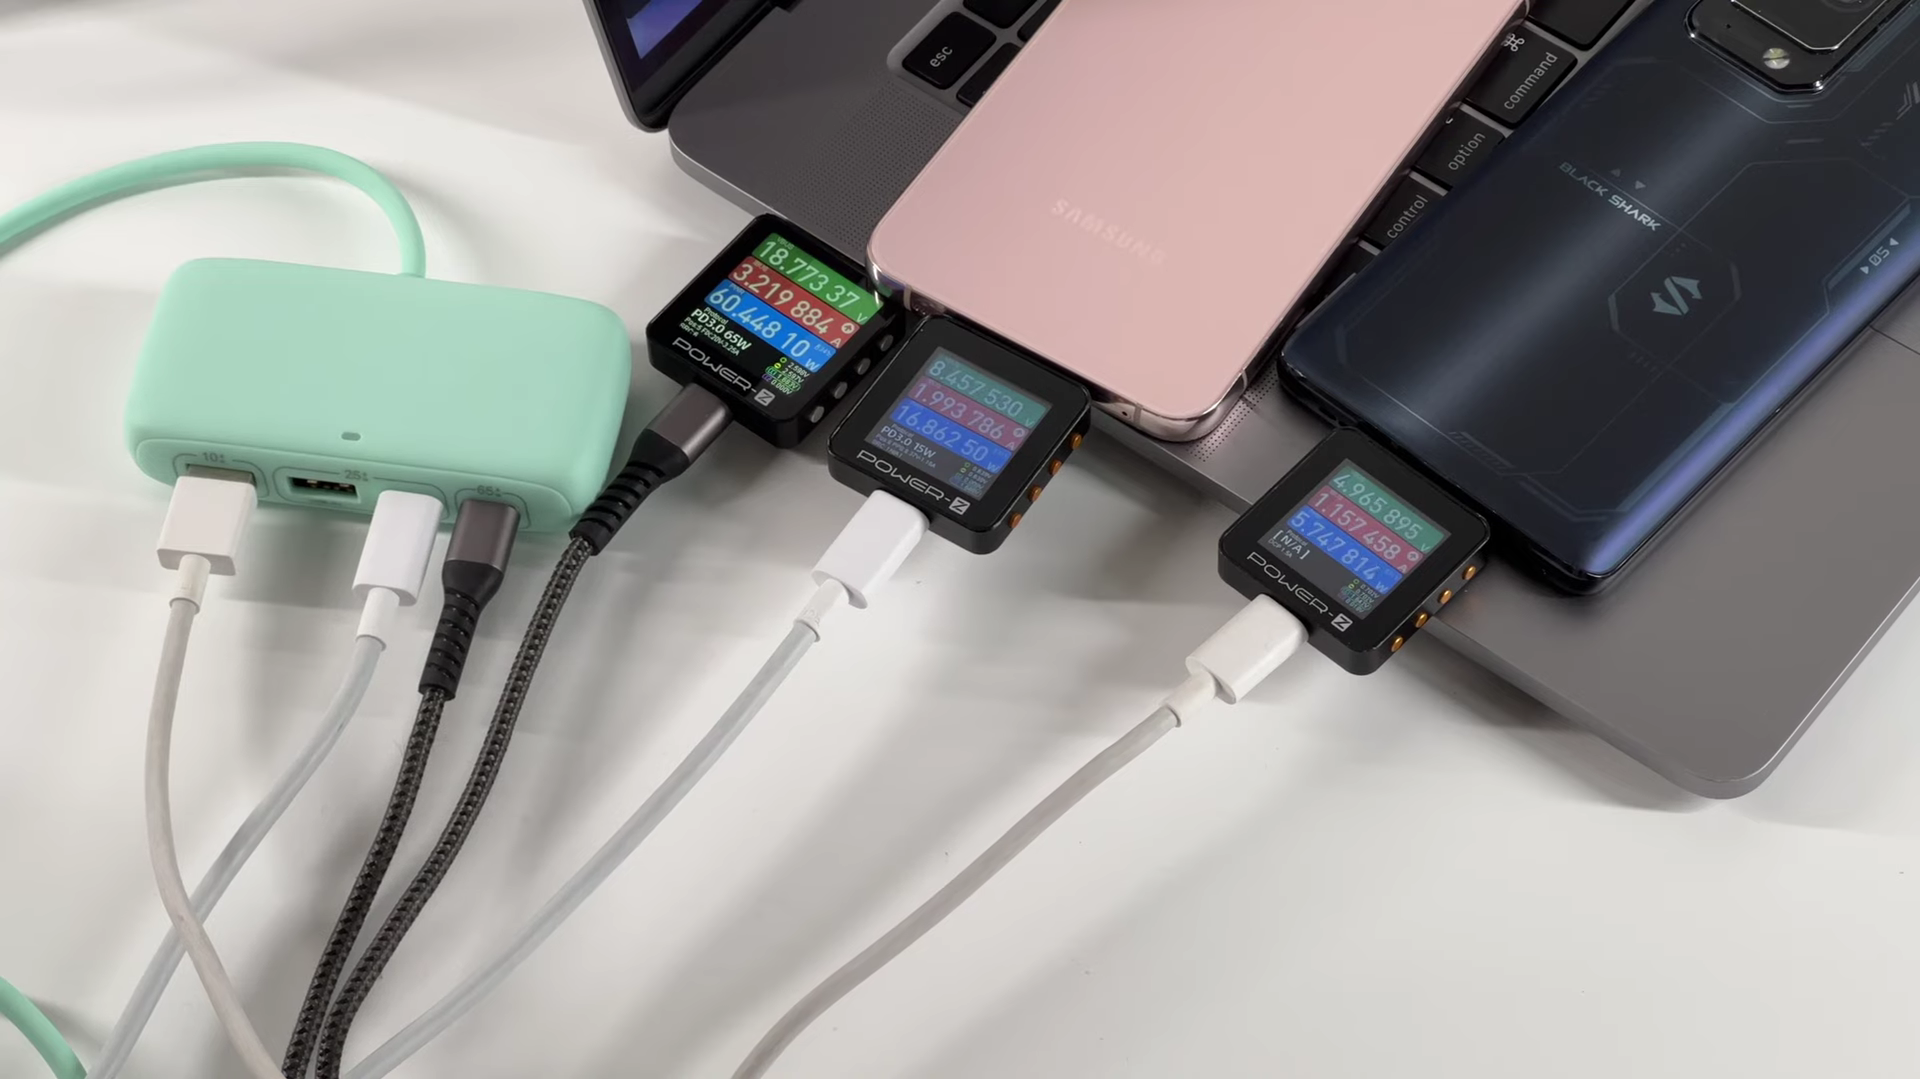 USB HUB for Charger? Review of Selerwin 100W USB-C Expansion HUB-Chargerlab